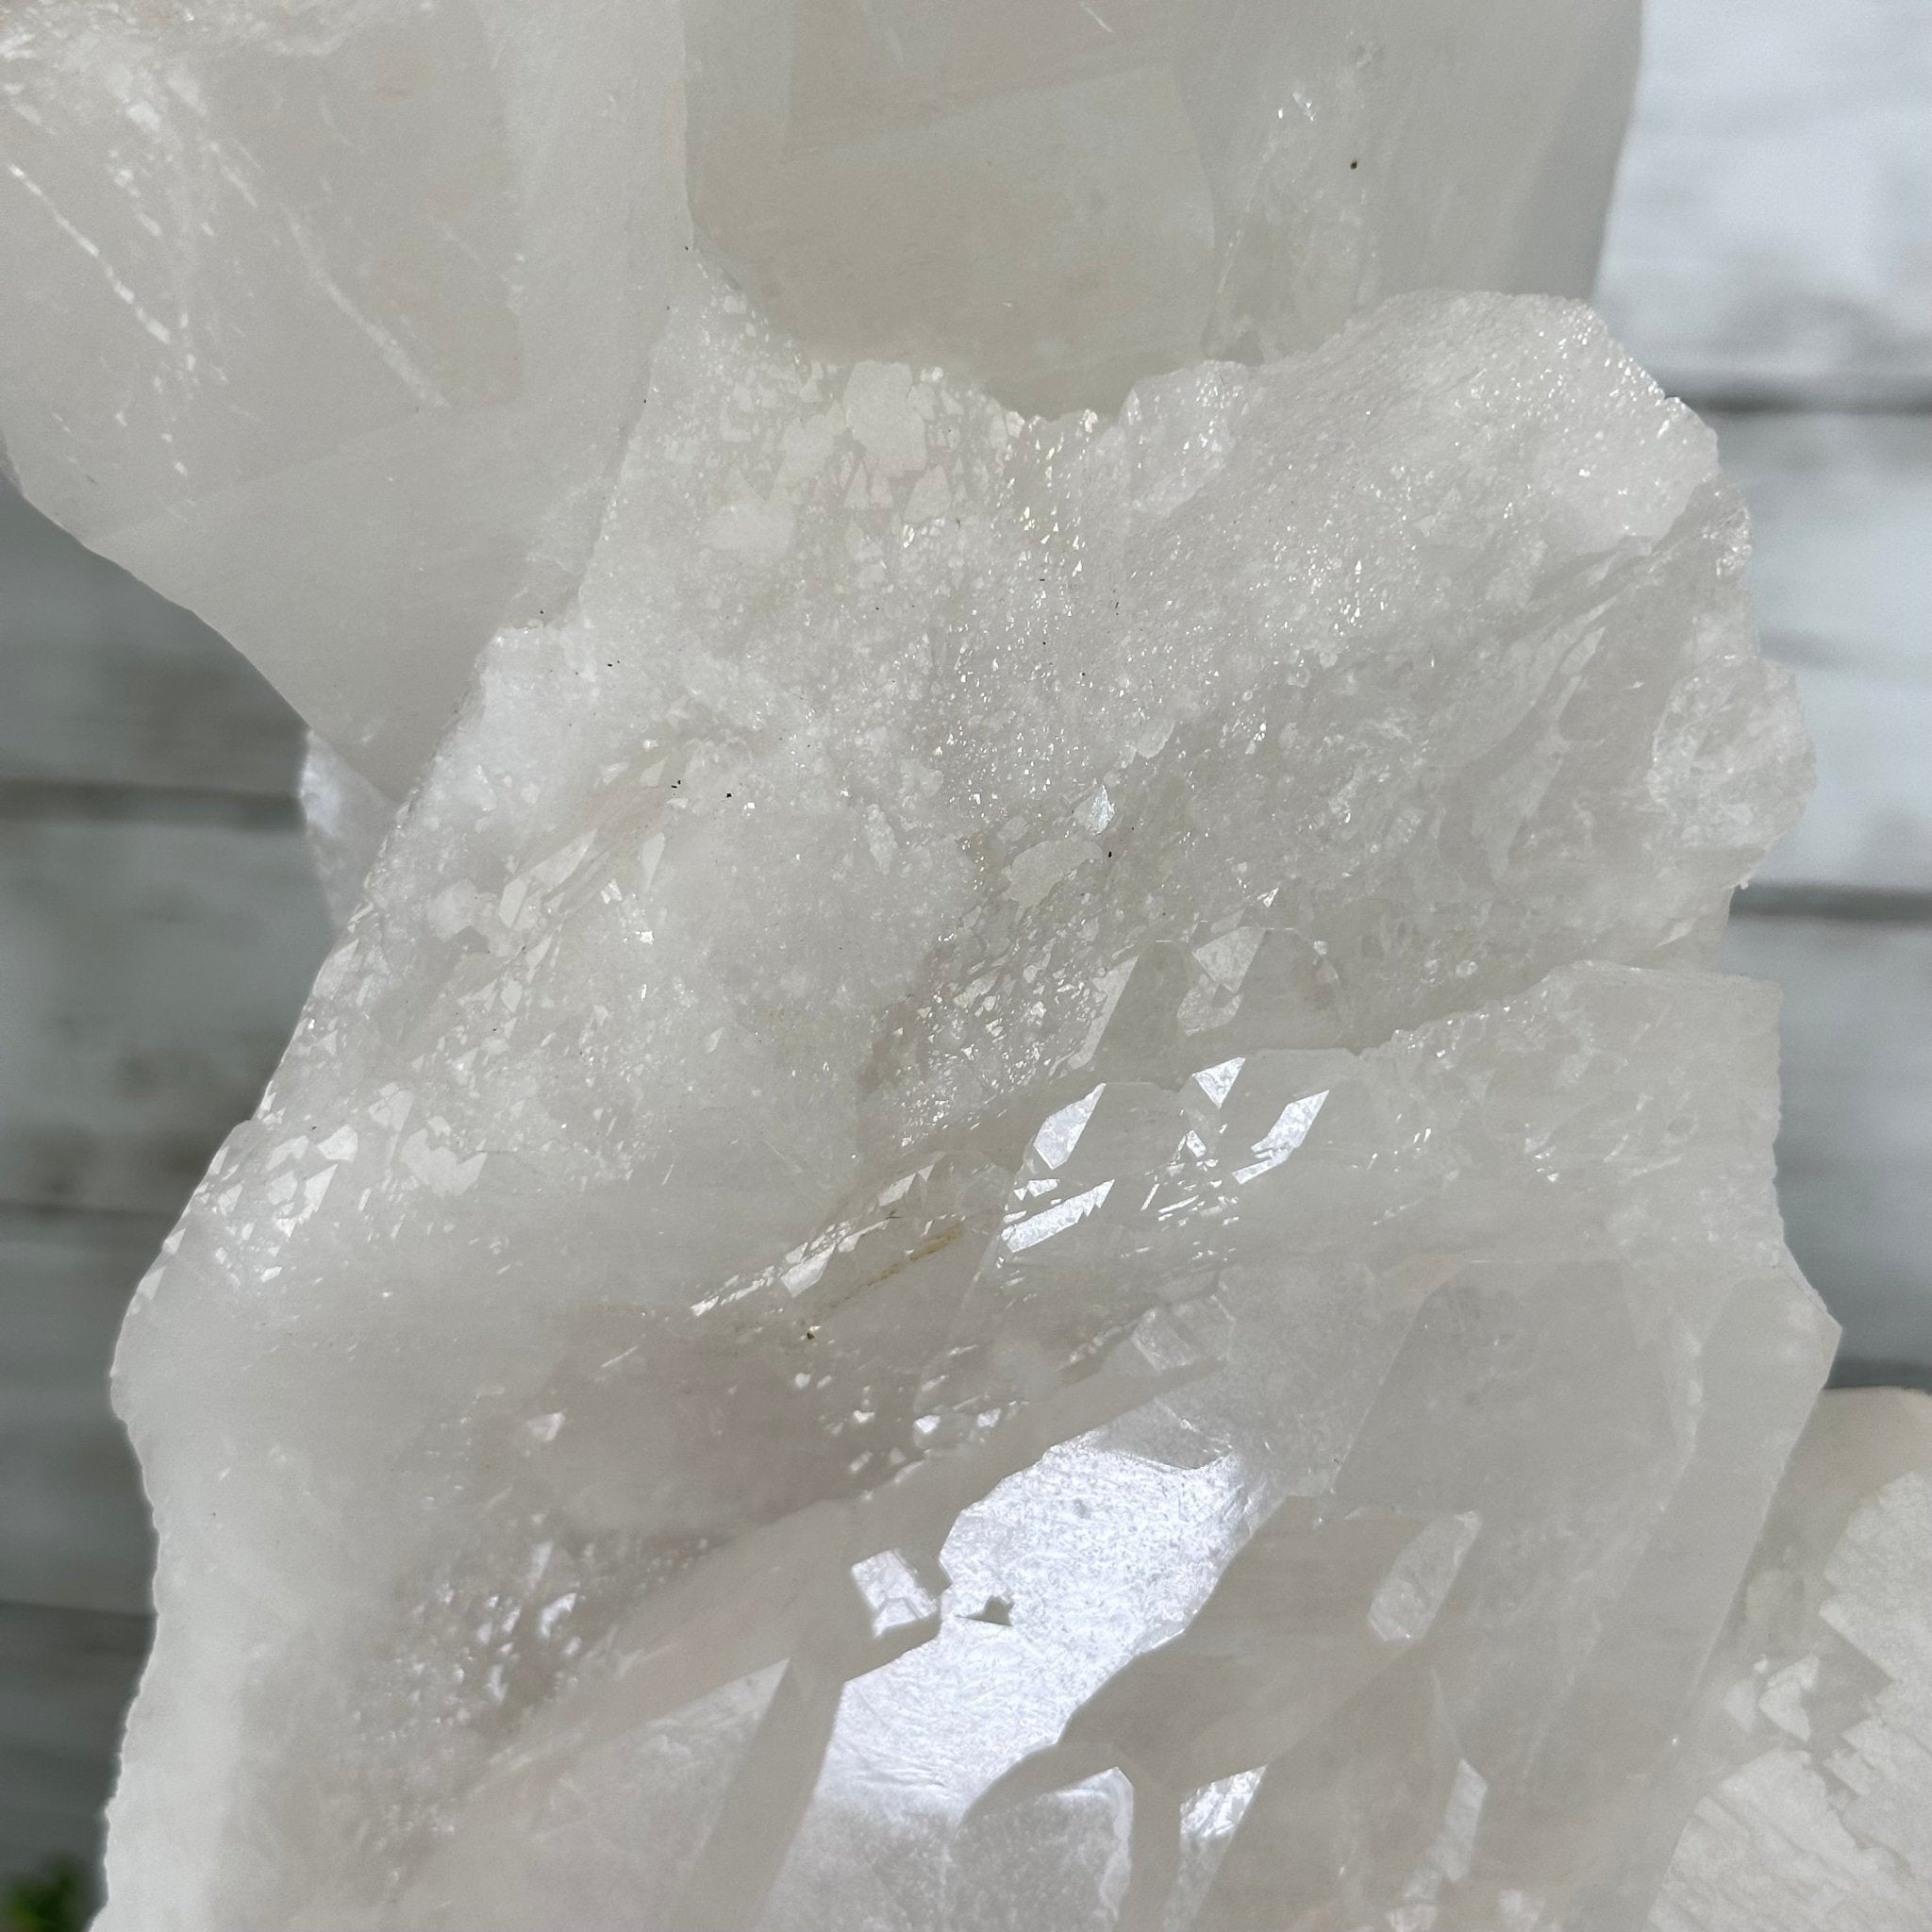 Clear Quartz Crystal Point on Fixed Base, 9.0 lbs & 14.5" Tall #3122CQ-011 - Brazil GemsBrazil GemsClear Quartz Crystal Point on Fixed Base, 9.0 lbs & 14.5" Tall #3122CQ-011Crystal Points3122CQ-011